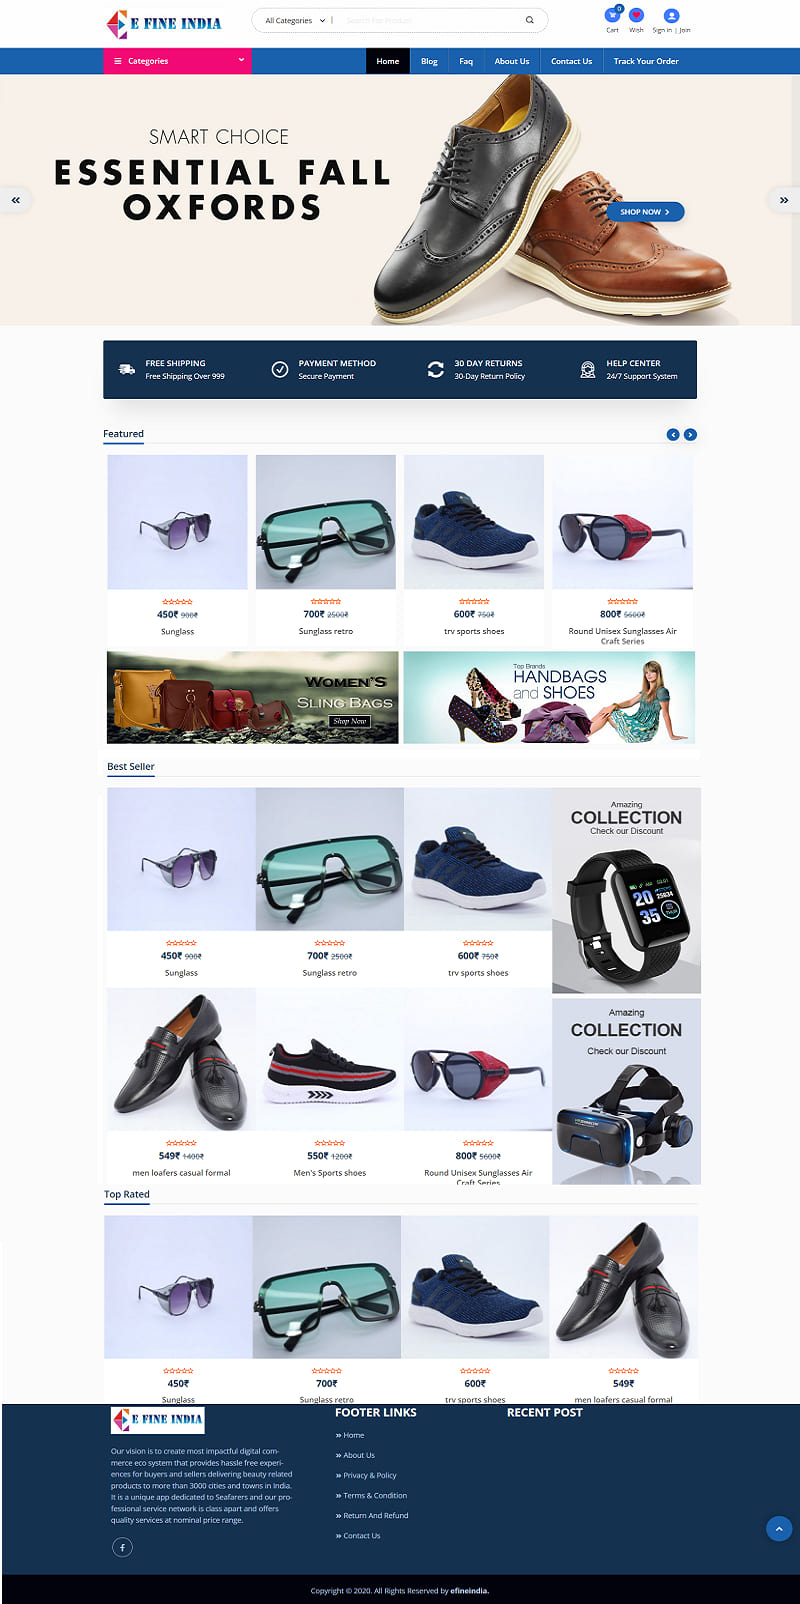 Fashion bags and Shoes Ecommerce Website